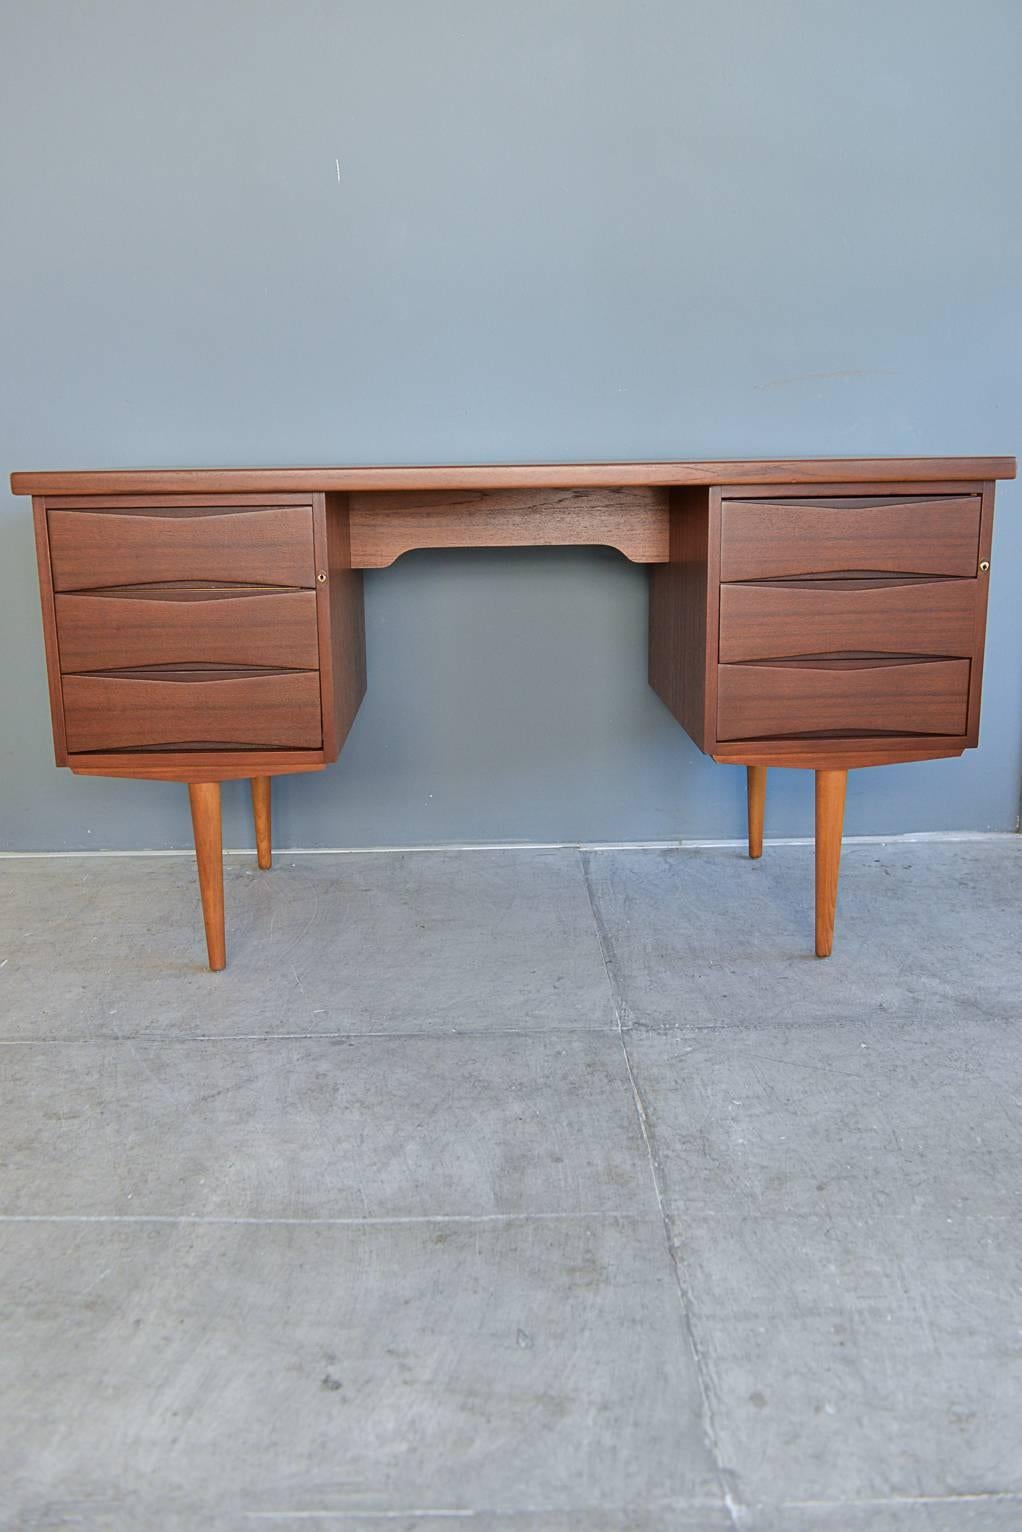 Sleek and beautiful teak bowtie front desk by Skeie Norway. Professionally restored with sculpted legs and beautiful bowtie front drawer pulls. Left drawer has hanging file folder brackets and right side has three drawers that are open.

Perfect